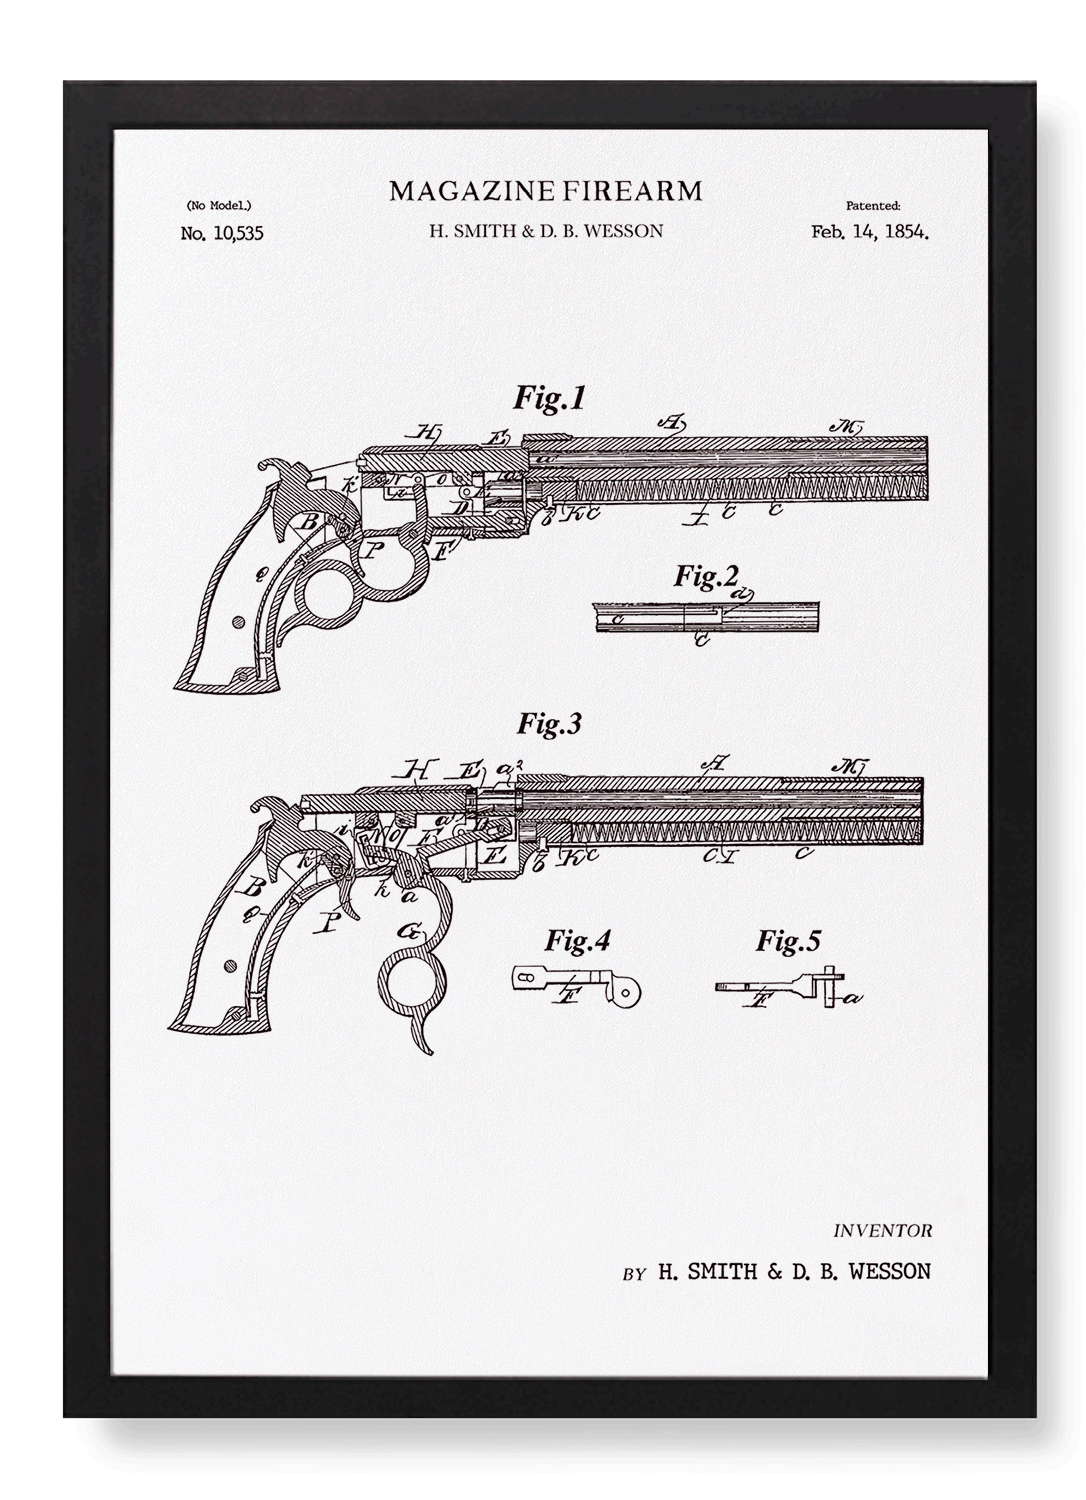 PATENT OF MAGAZINE FIREARMS (1854)